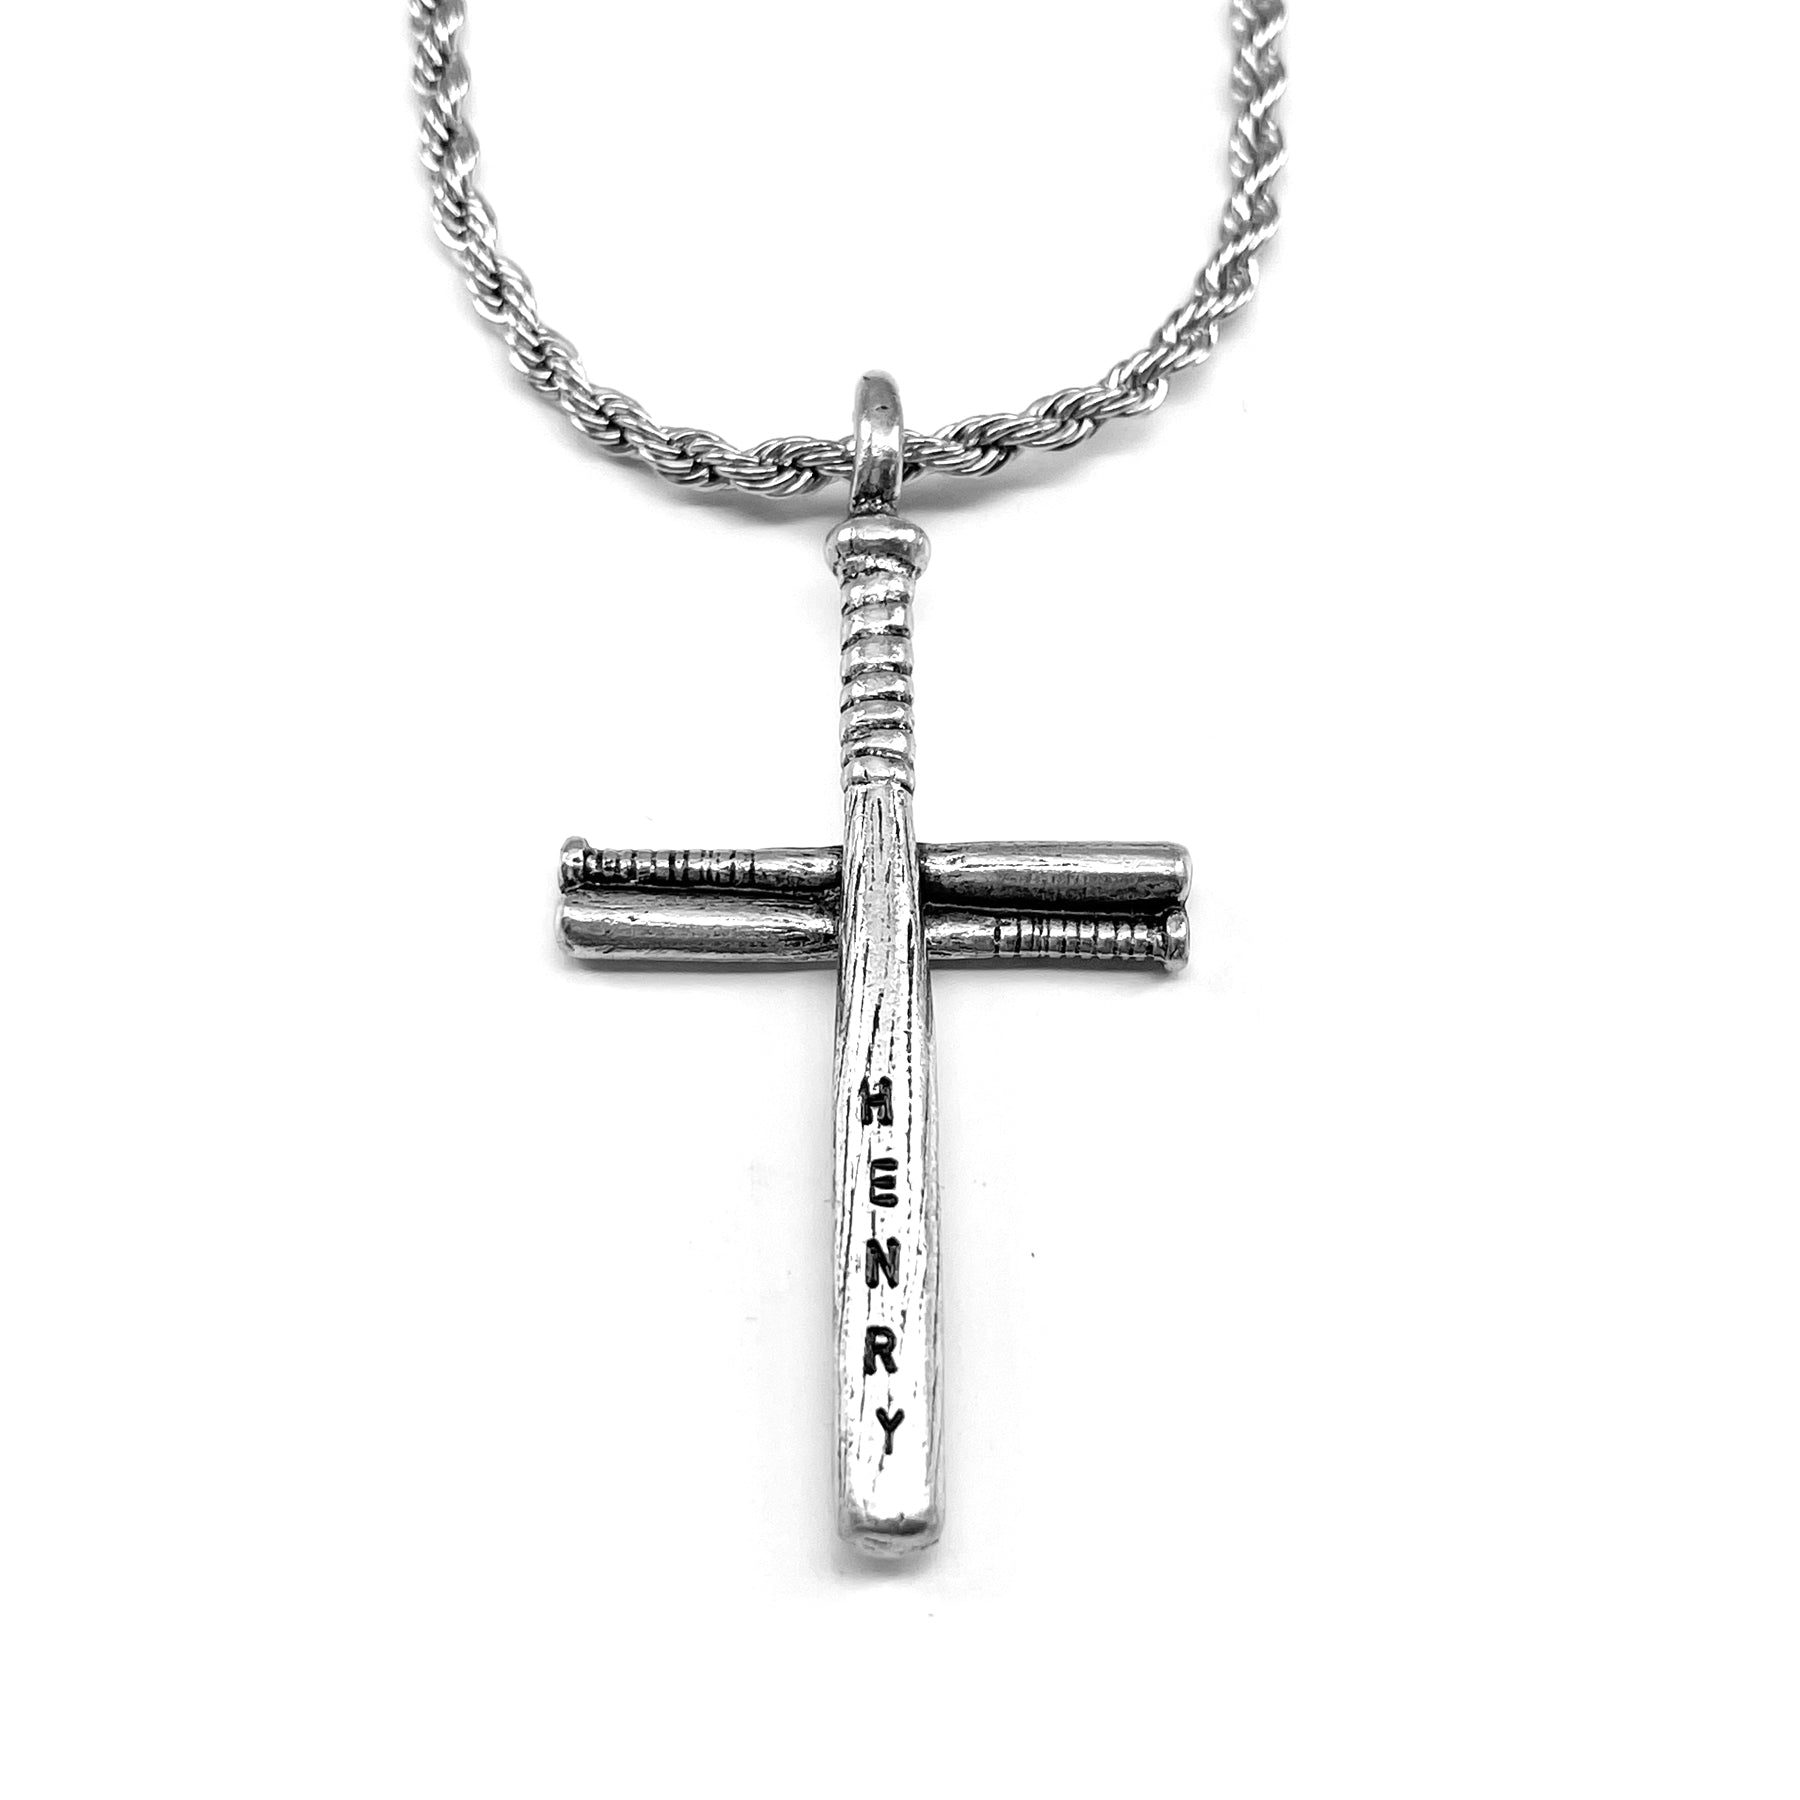 NOVE JEWELRY men women fashion 316L stainless steel personalized creative  sport sportive baseball bat cross pendant punk rock necklace with chain  silver / gold | Wish